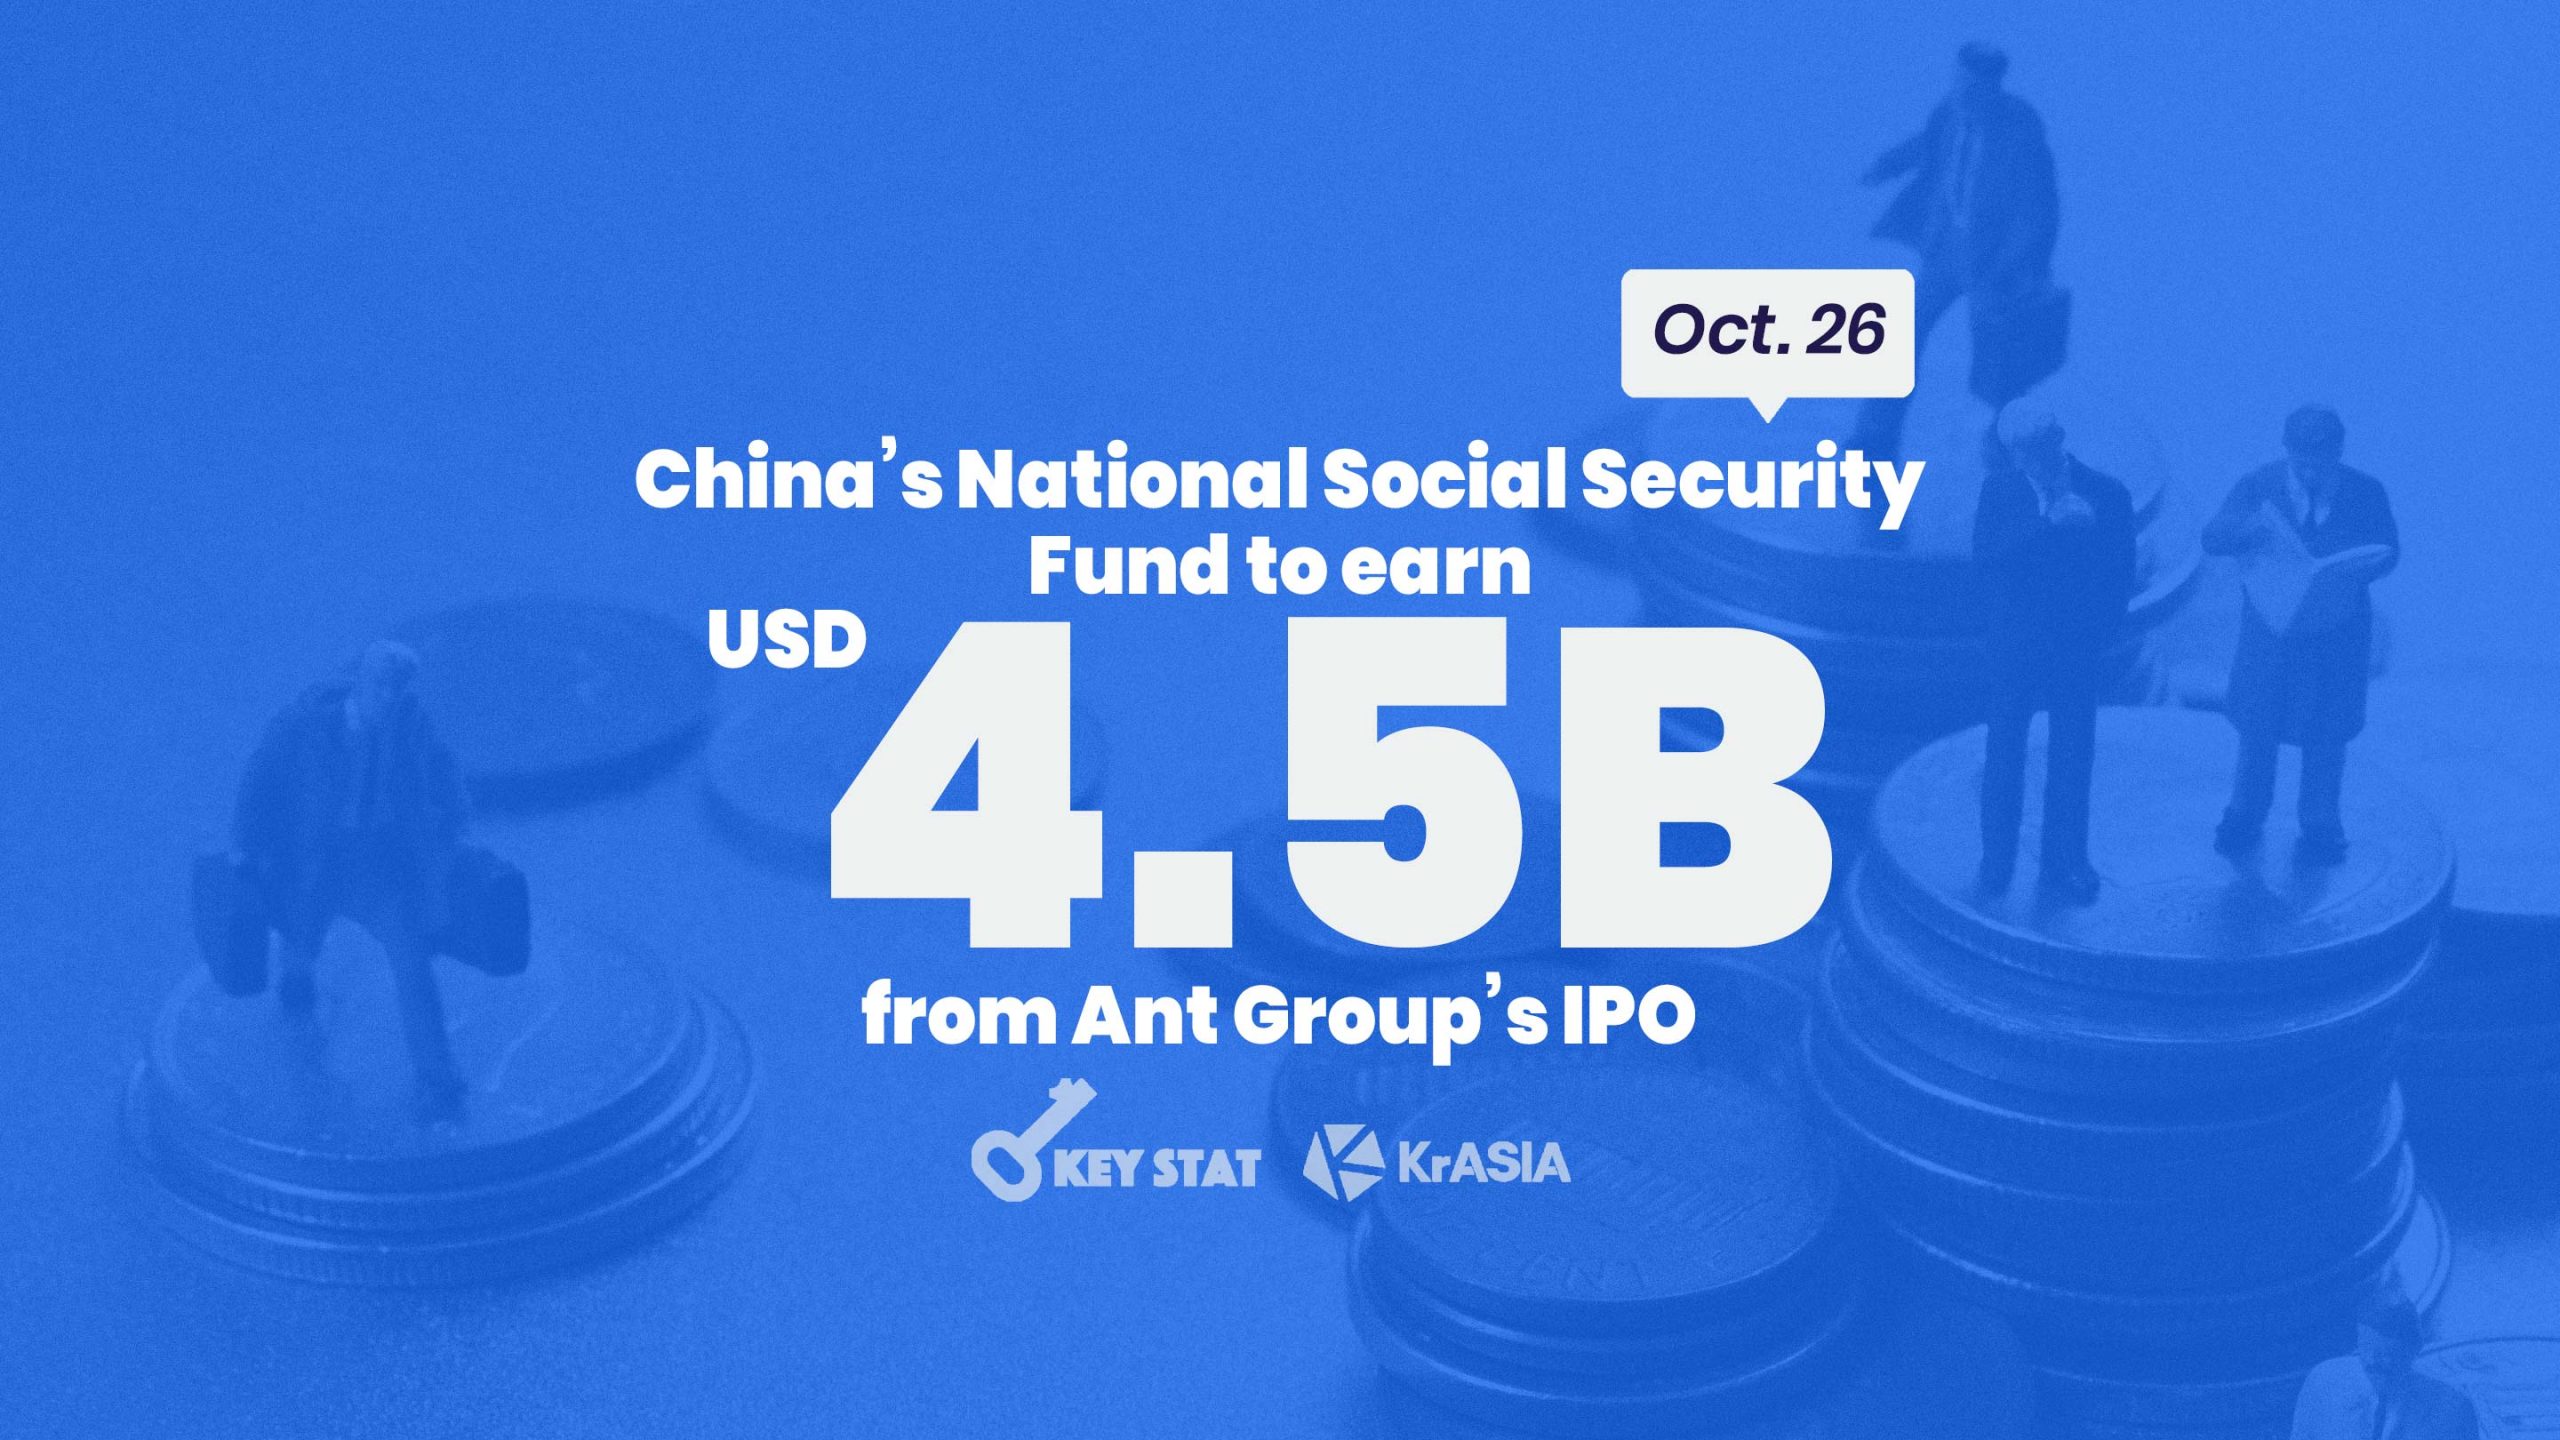 KEY STAT | 1.3 billion Chinese citizens to benefit from Ant Group IPO